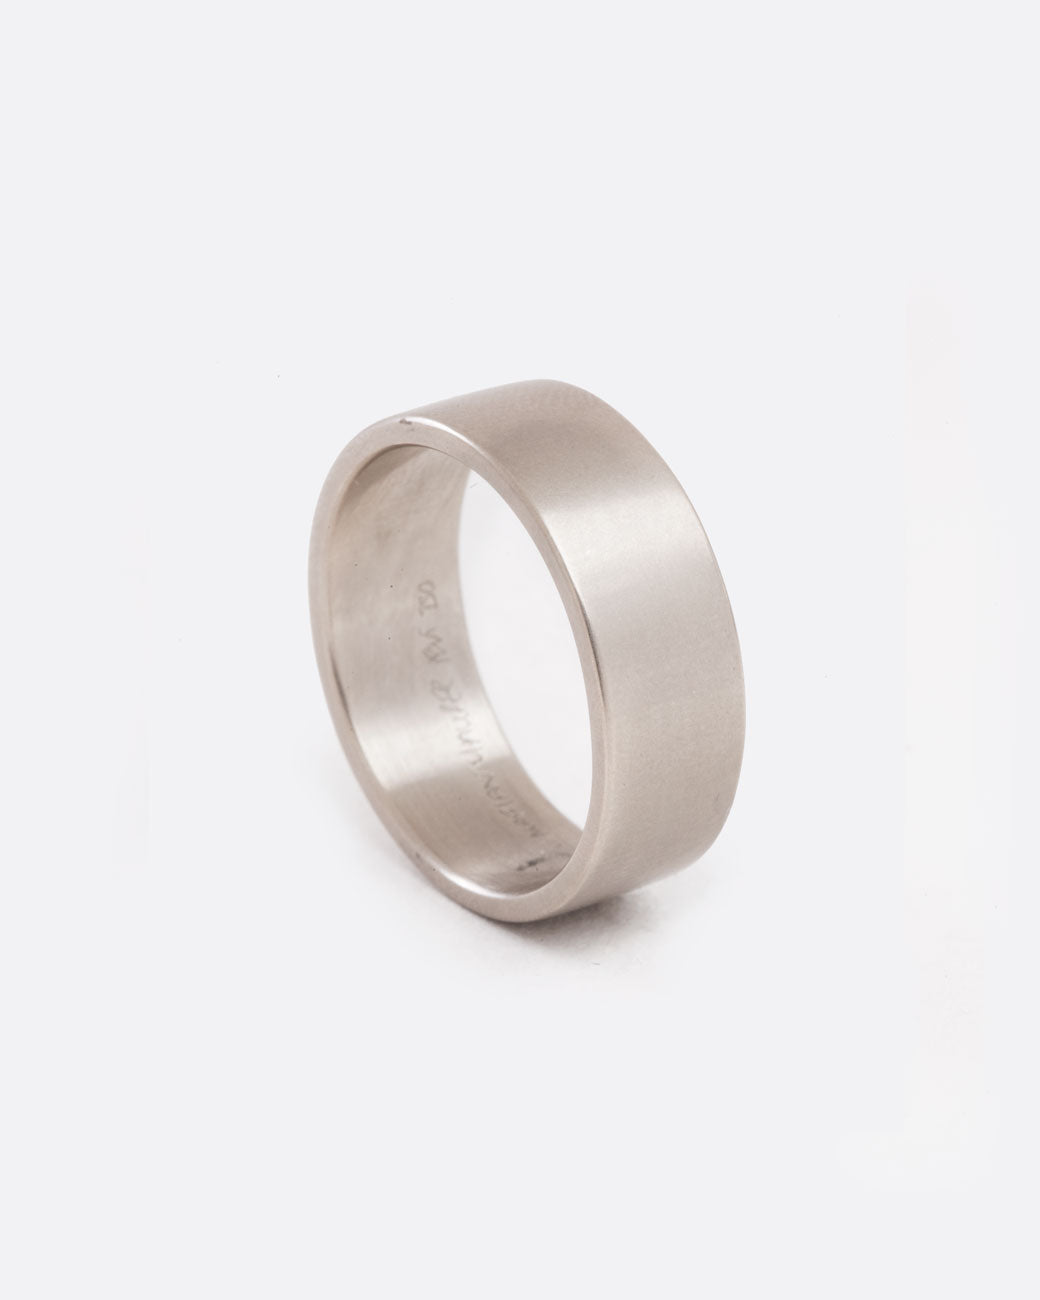 Slightly angled standing view of a simple, thick white gold band with matte finish